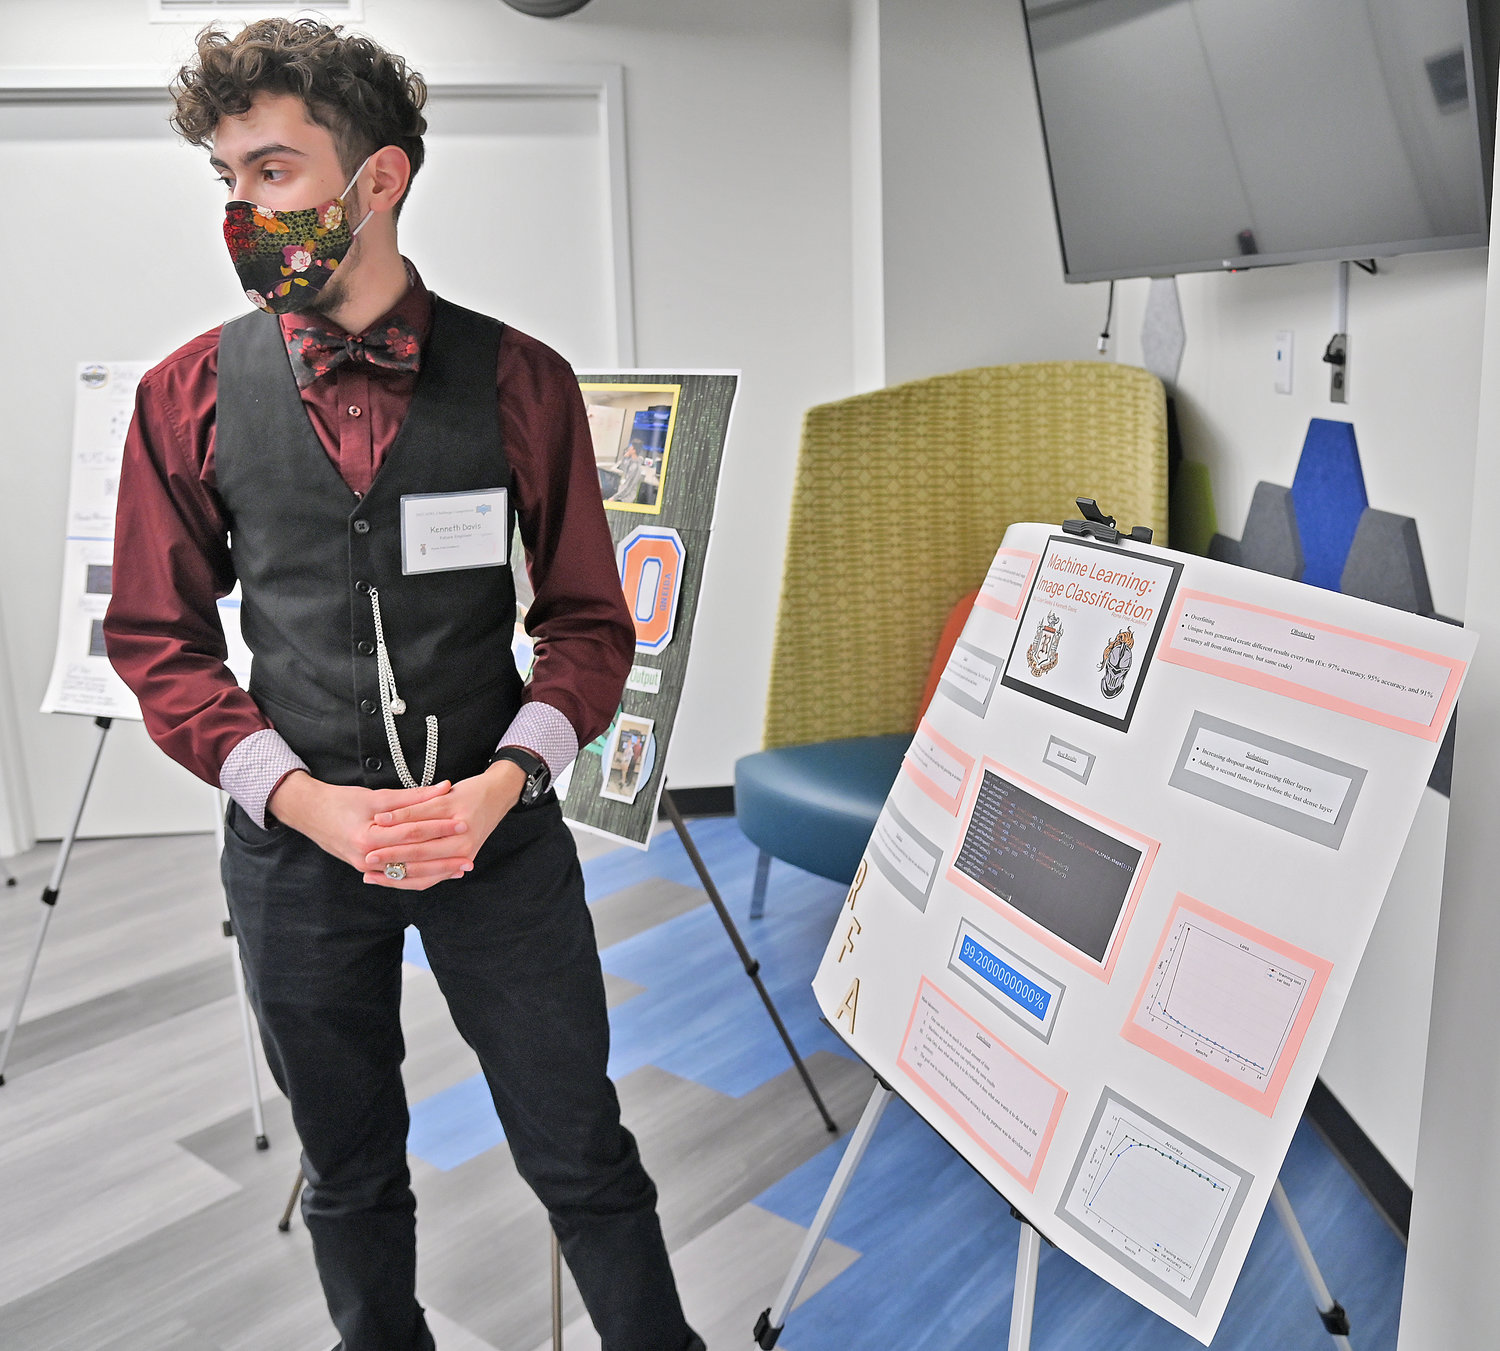 RFA juniors Kenneth W. Davis talks about their poster and the project they worked on this past week at the STEM event at Innovare. Colyn T Seeley was his working partner on the project also and junior at RFA